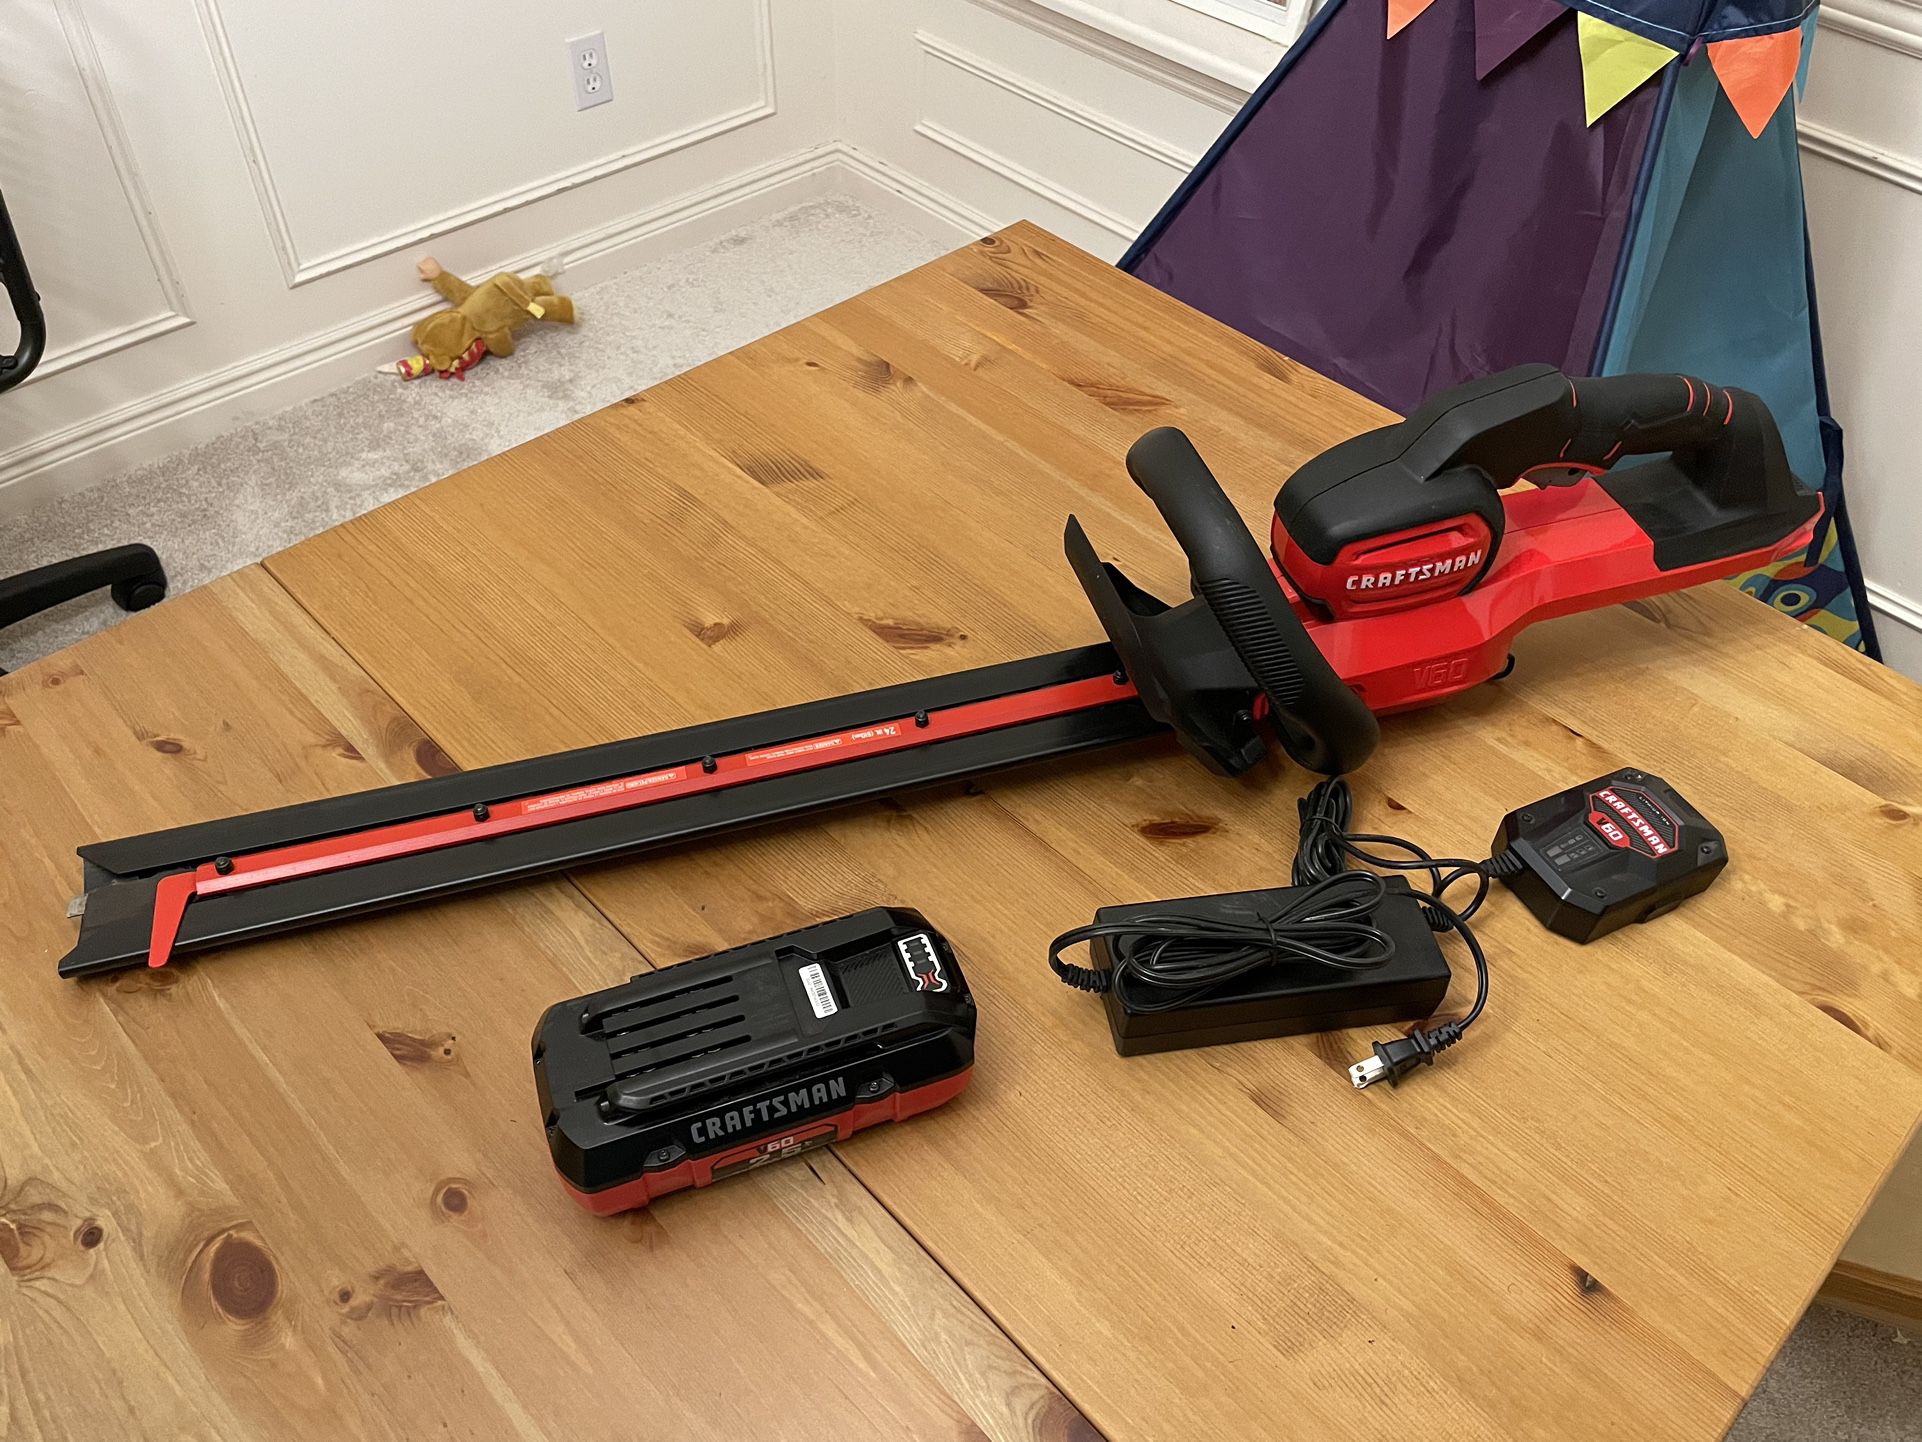 [Like New] CRAFTSMAN V60* Cordless Hedge Trimmer, 24-Inch (CMCHTS860E1) for  Sale in Redmond, WA OfferUp